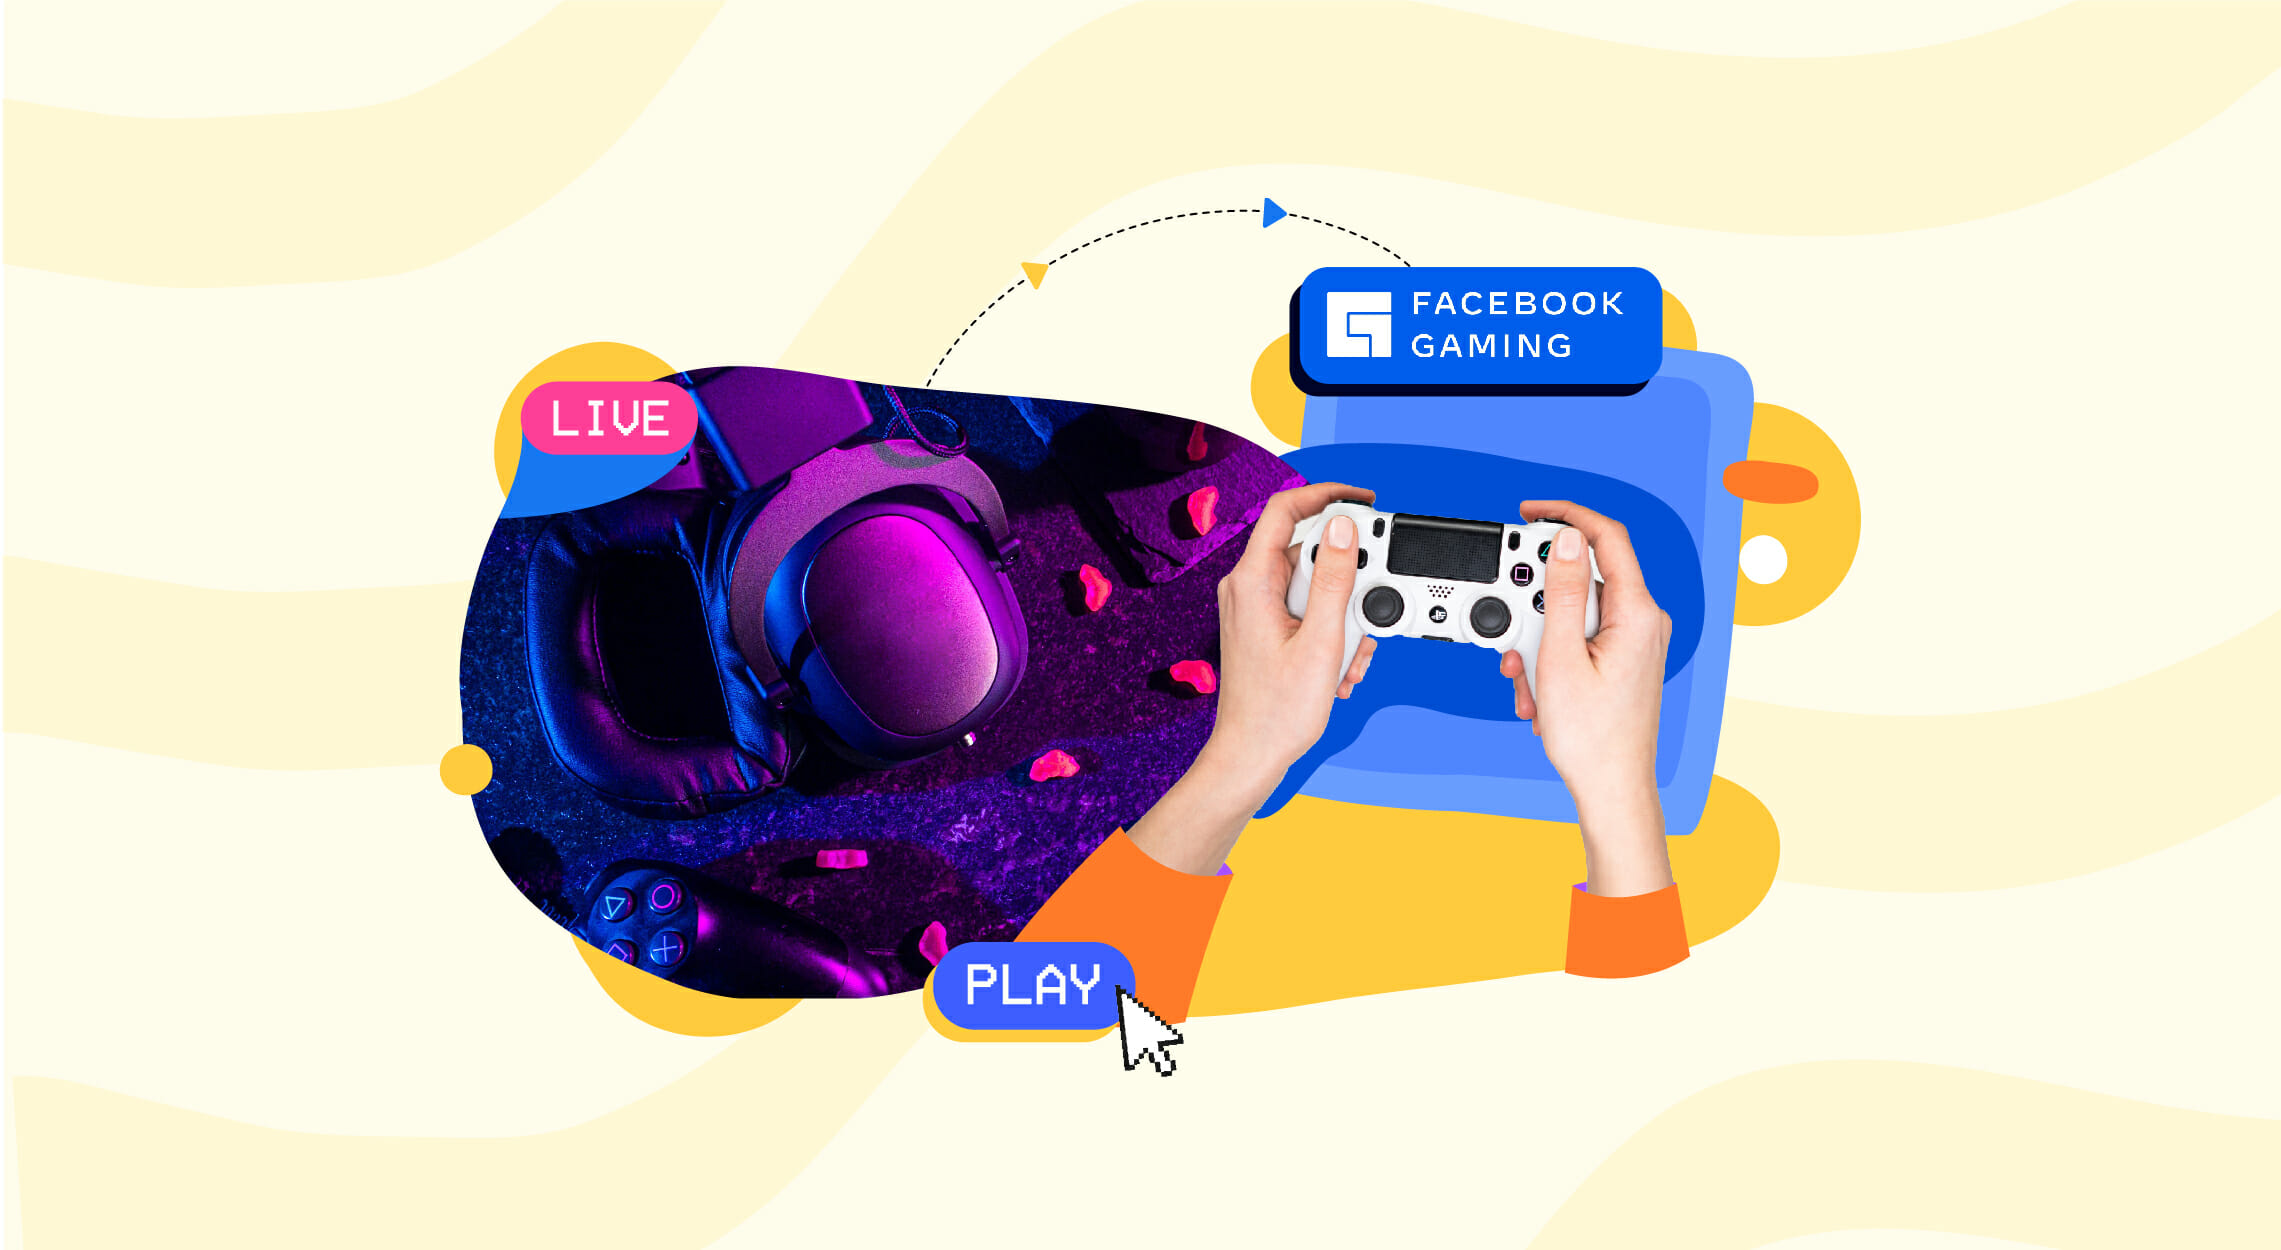 Facebook takes on Twitch, , and Mixer with dedicated game